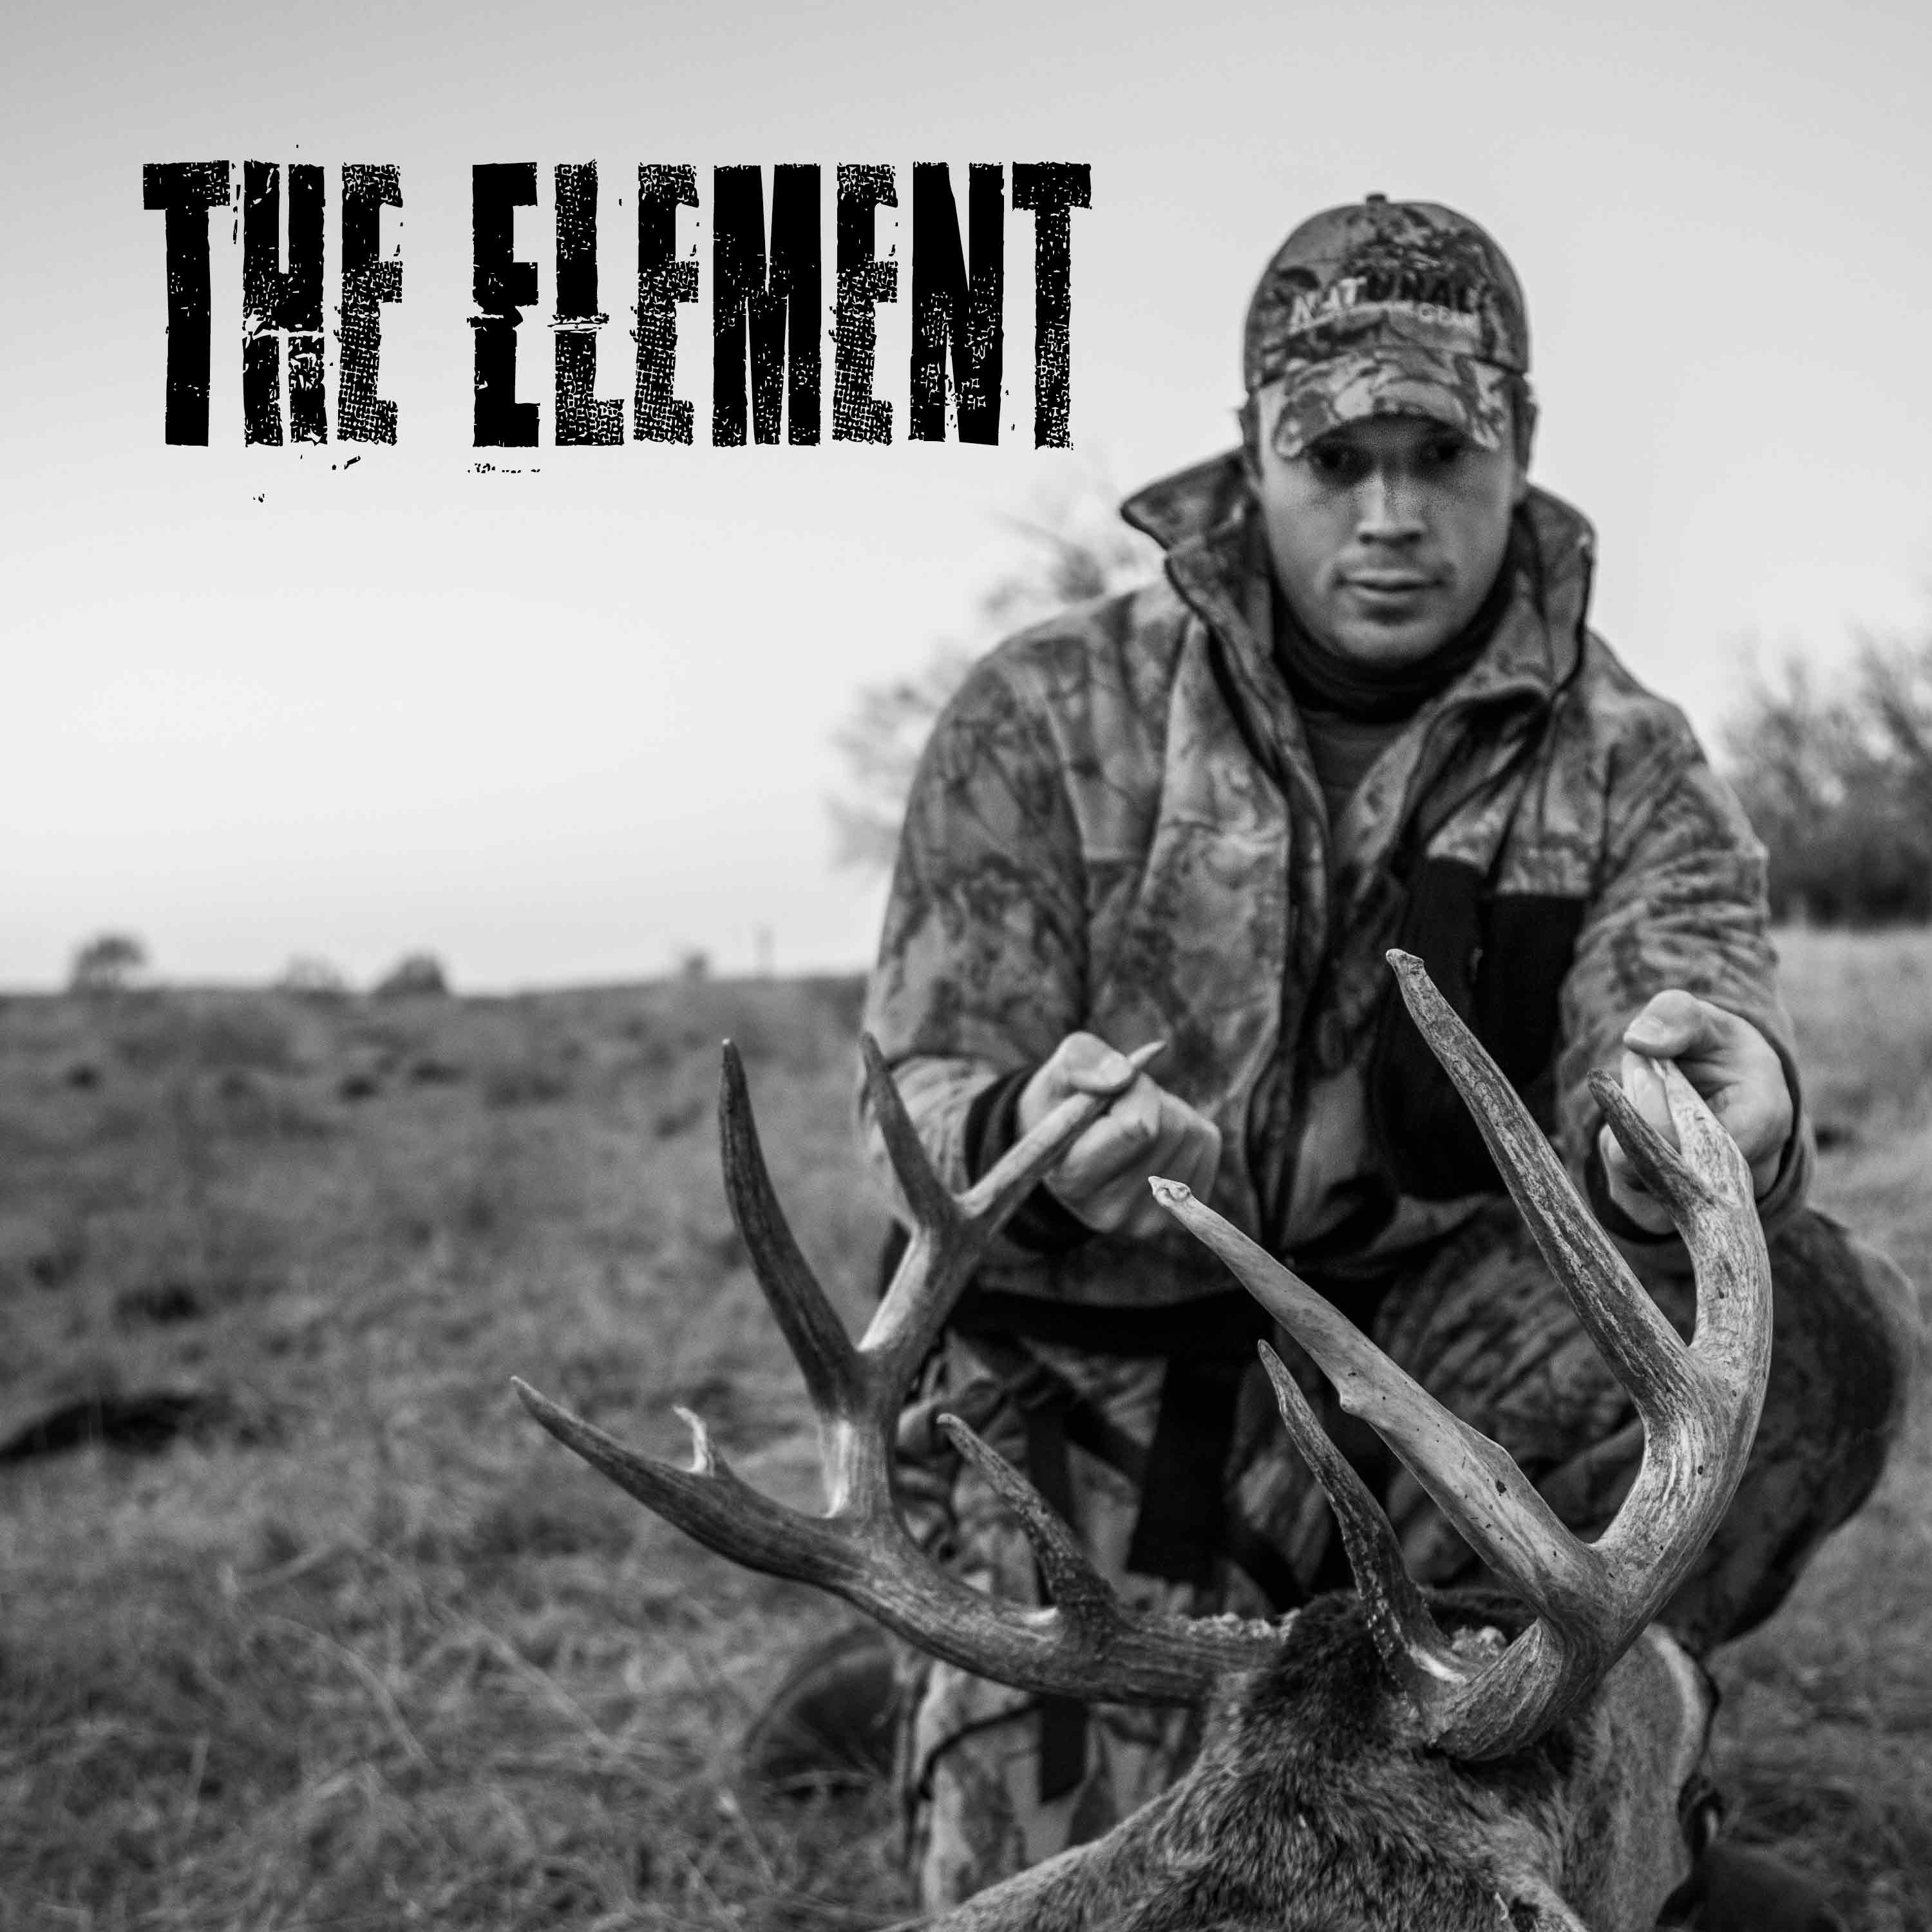 E139: The Licking Branch (feat. Dave Skinner of Whitetail Properties on How To Make Mock Scrapes, Trail Camera Tactics, Deer Hunting Pre-Rut Action)